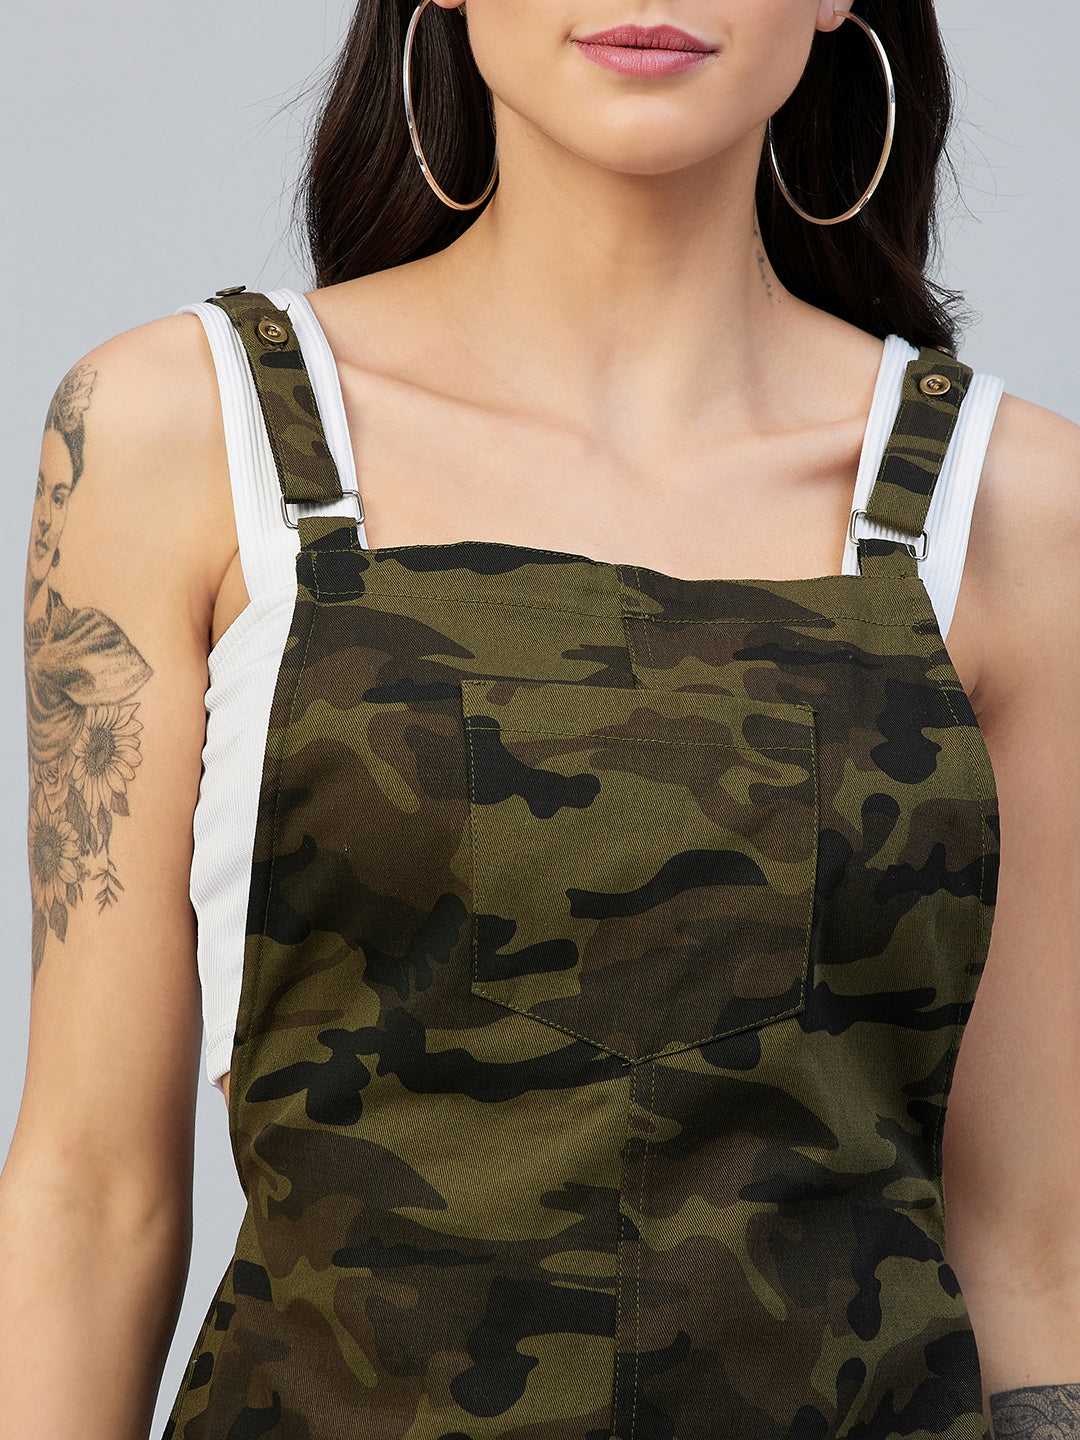 Women's Army Print Cotton Twill Dungaree (Inner top not included)